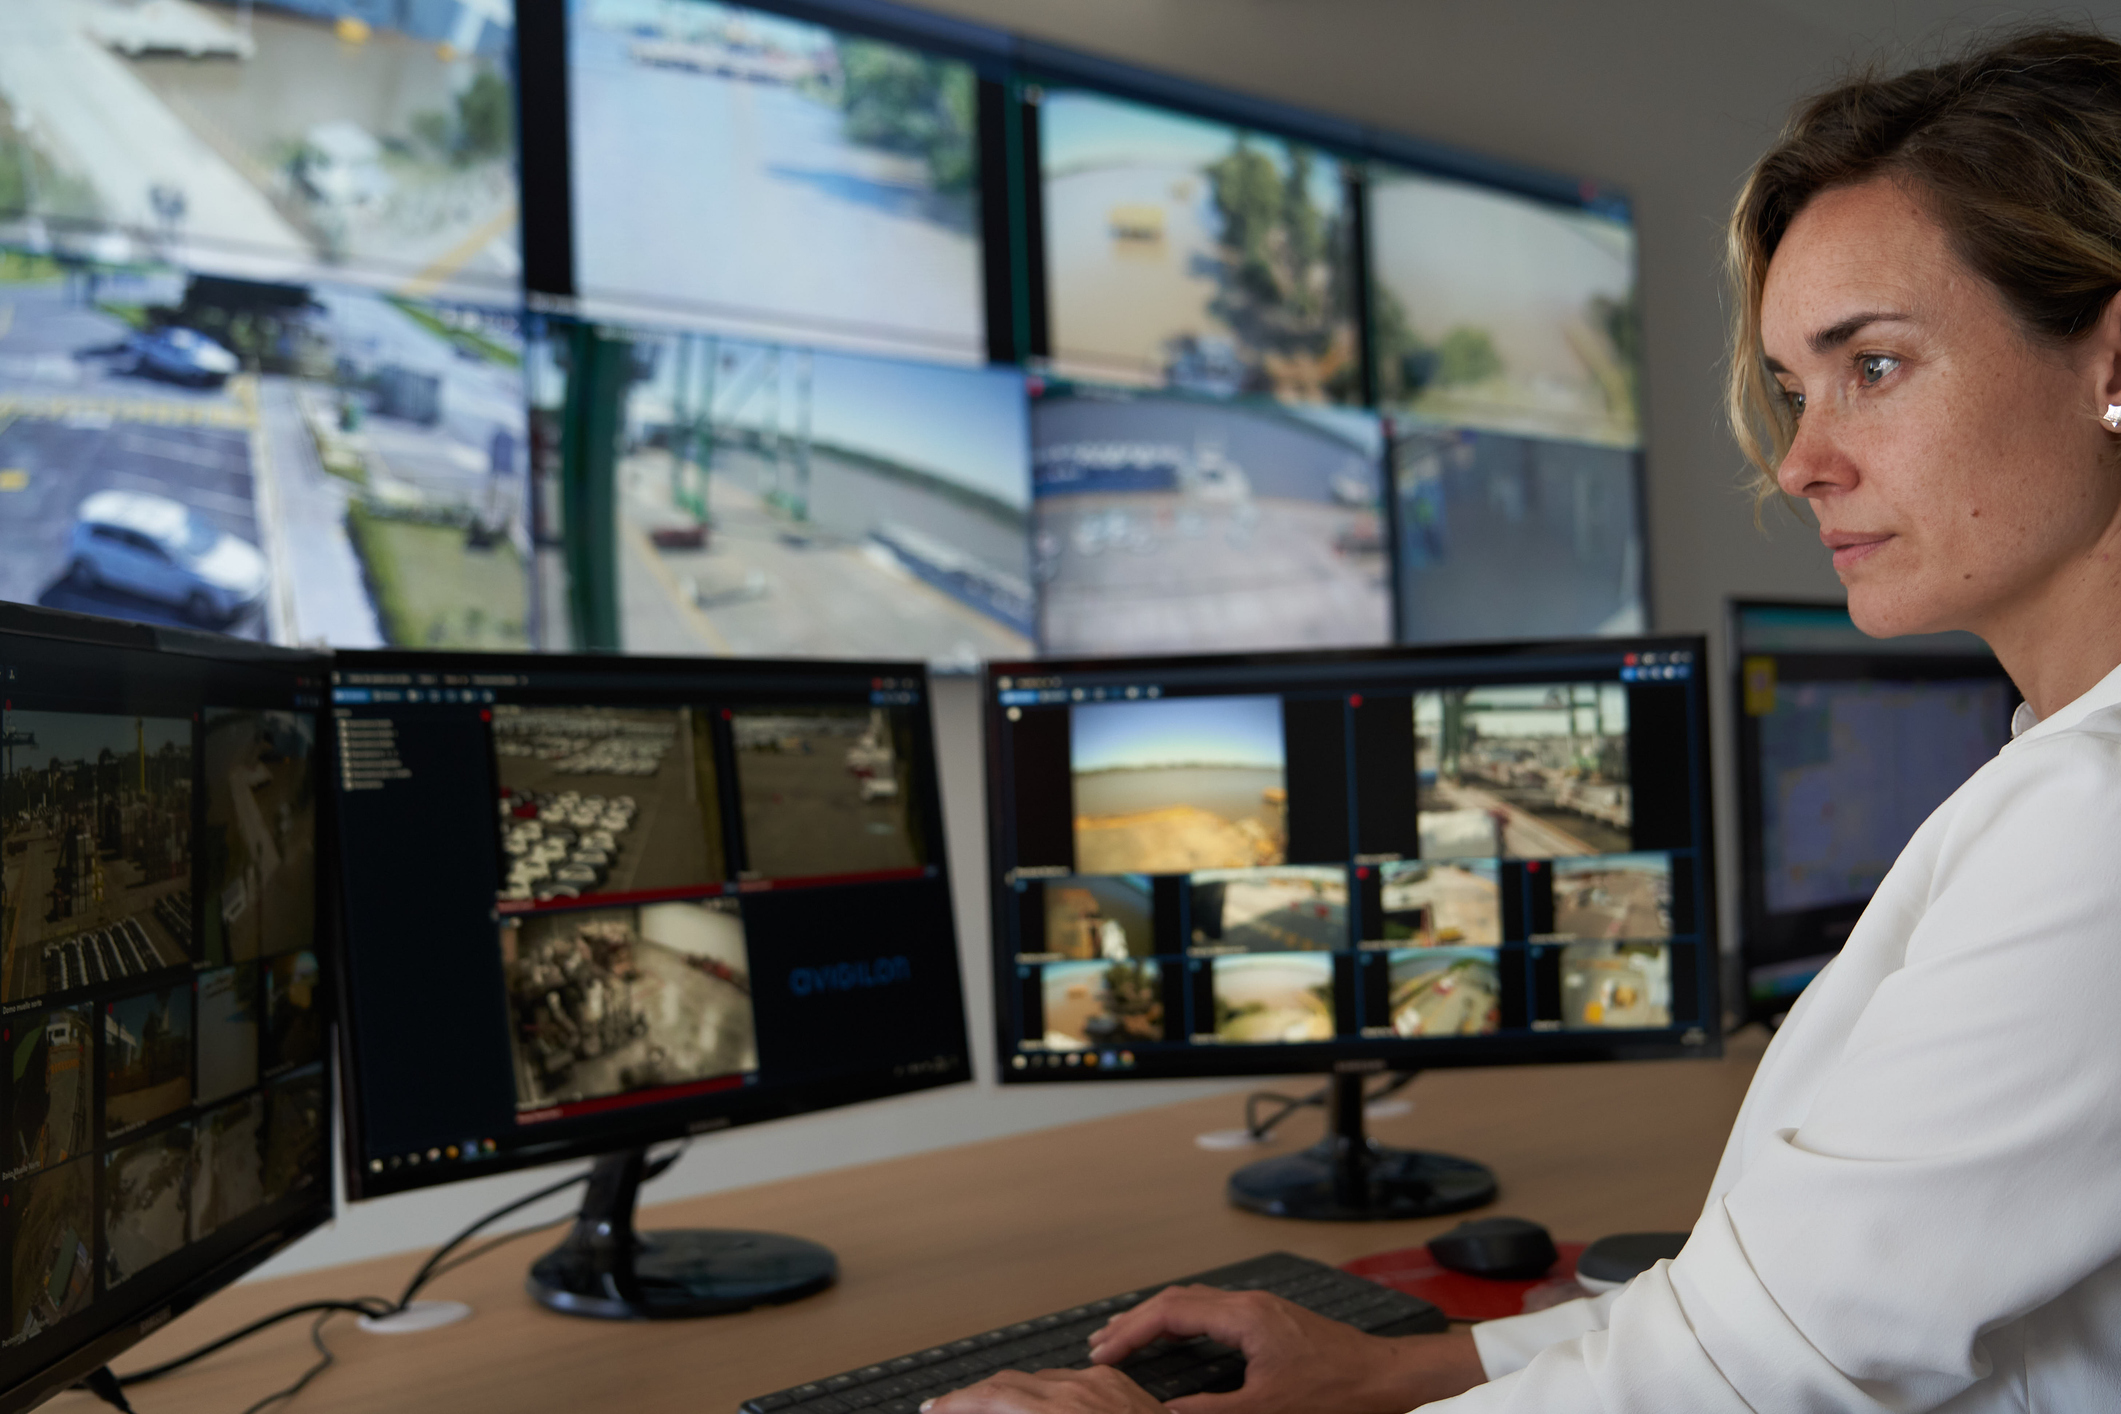 Adult female security worker watching monitors at control room